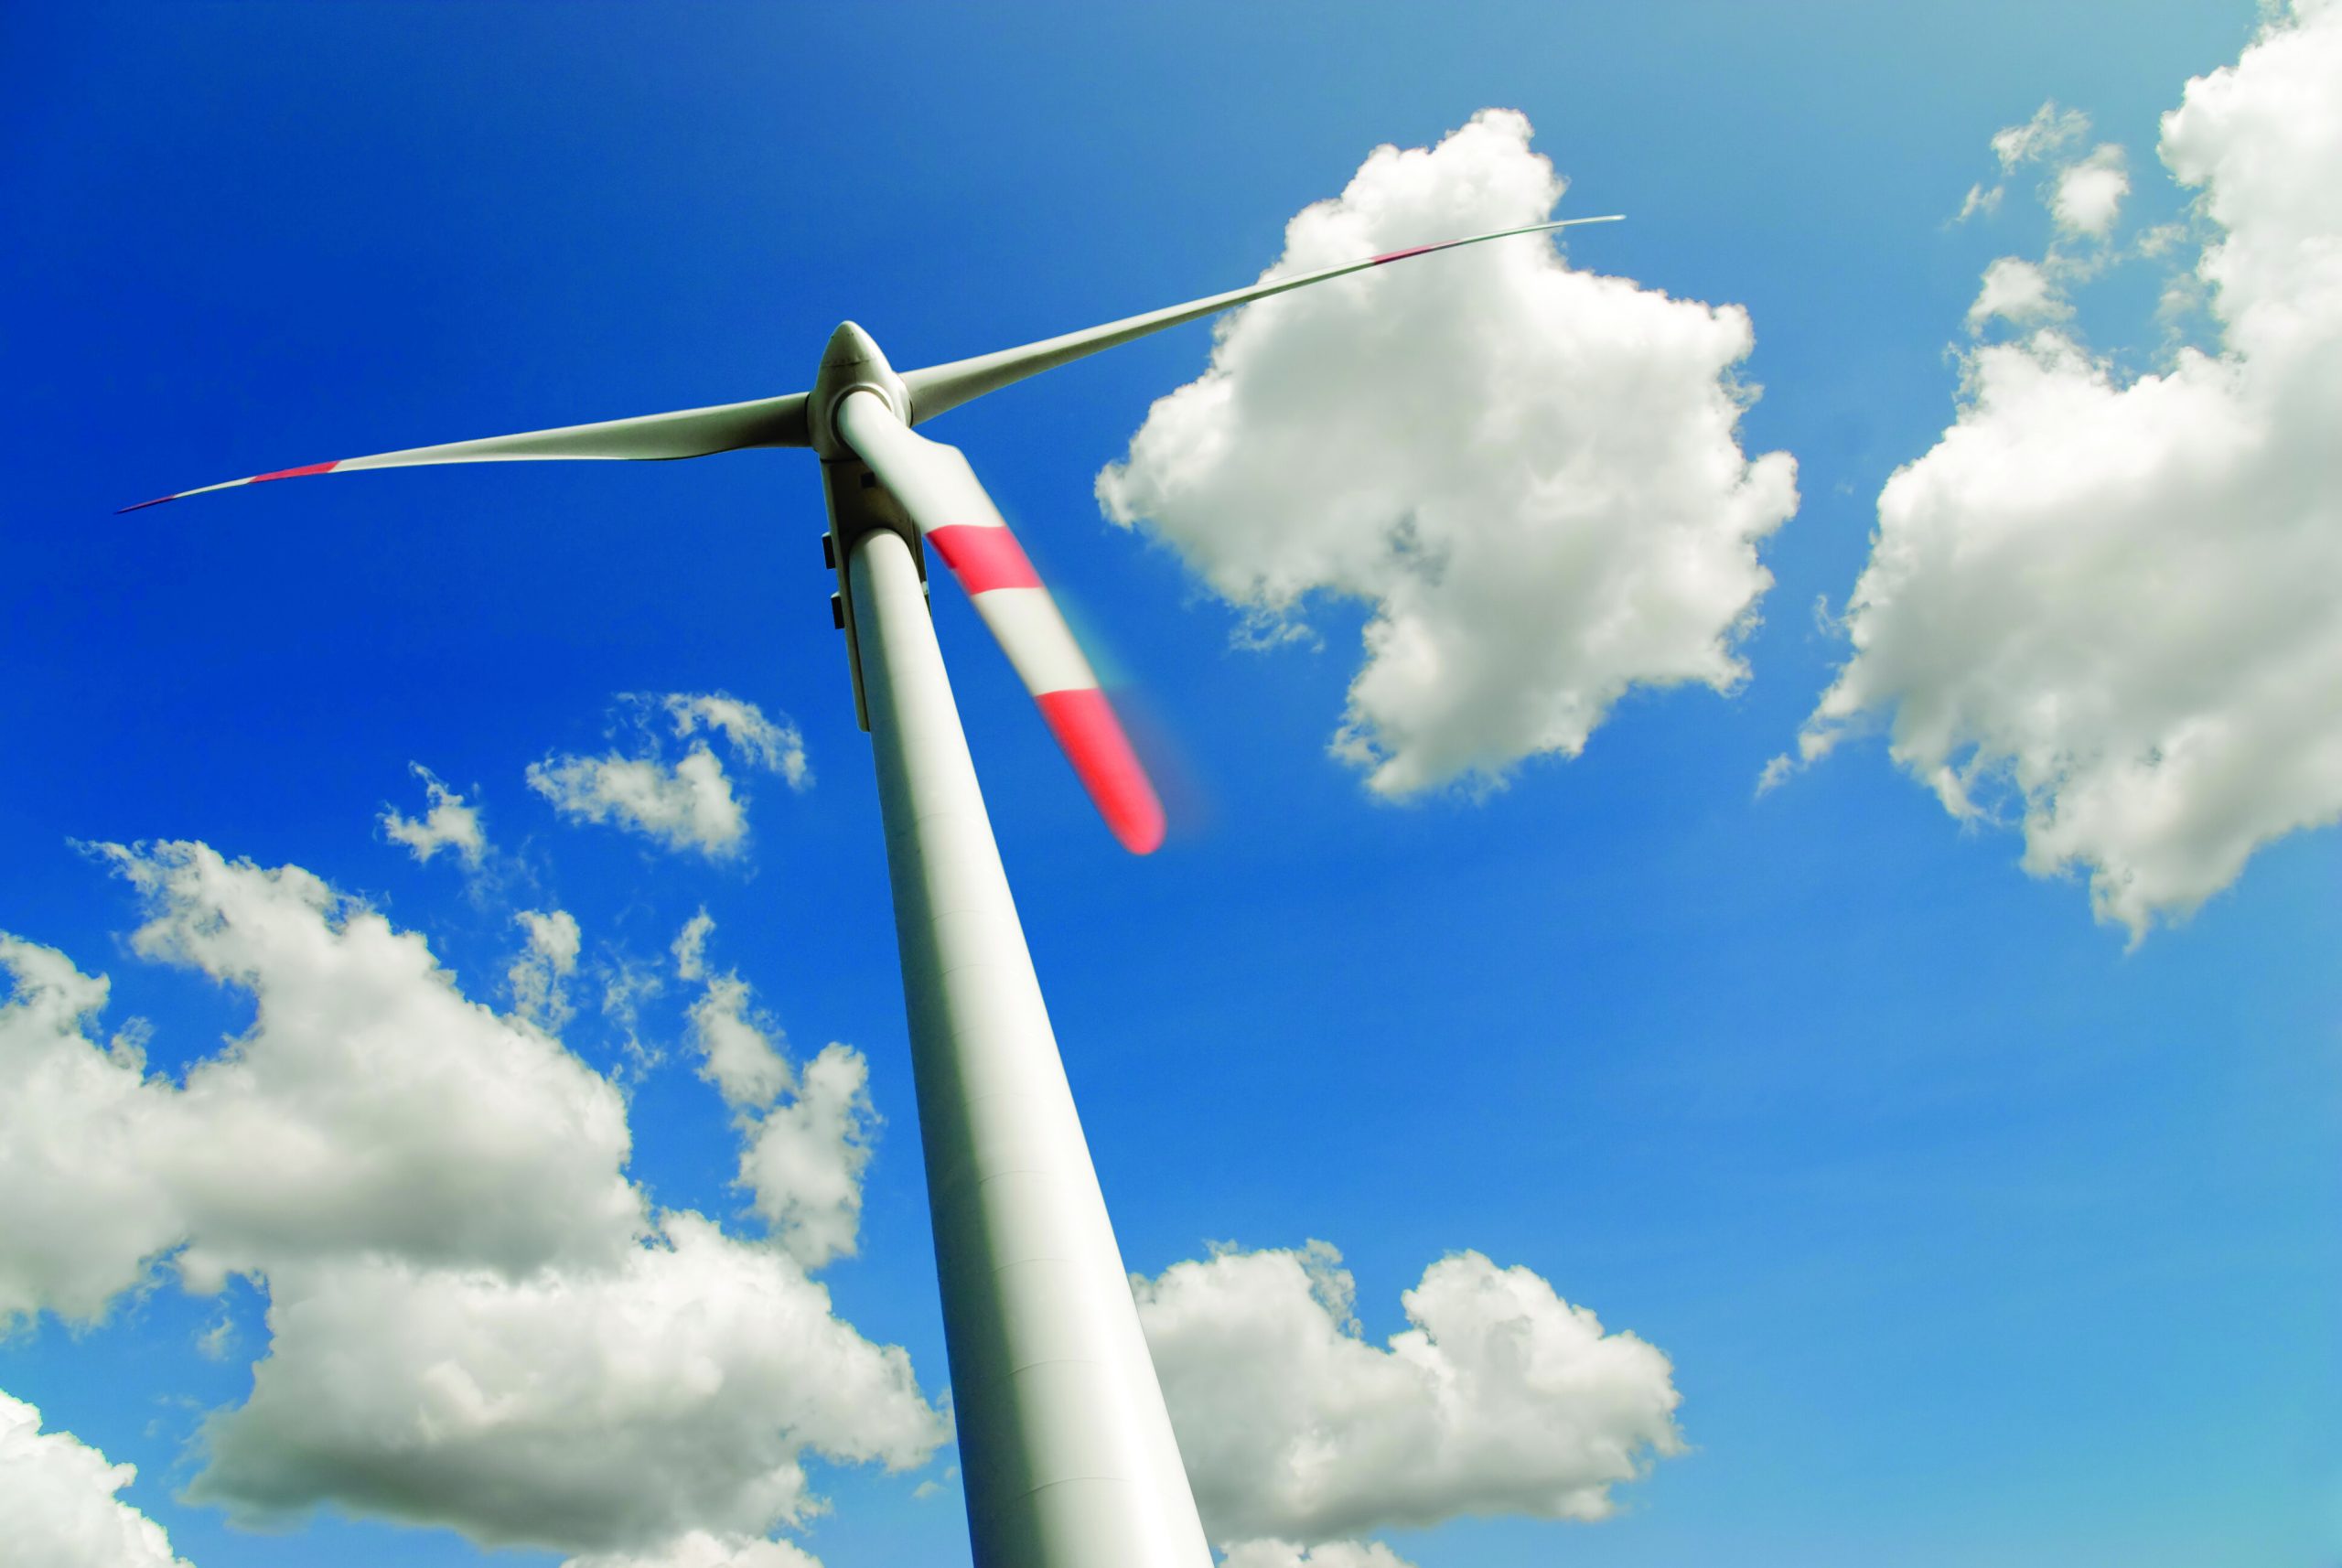 Bearing and gearbox failures: Challenge to wind turbines